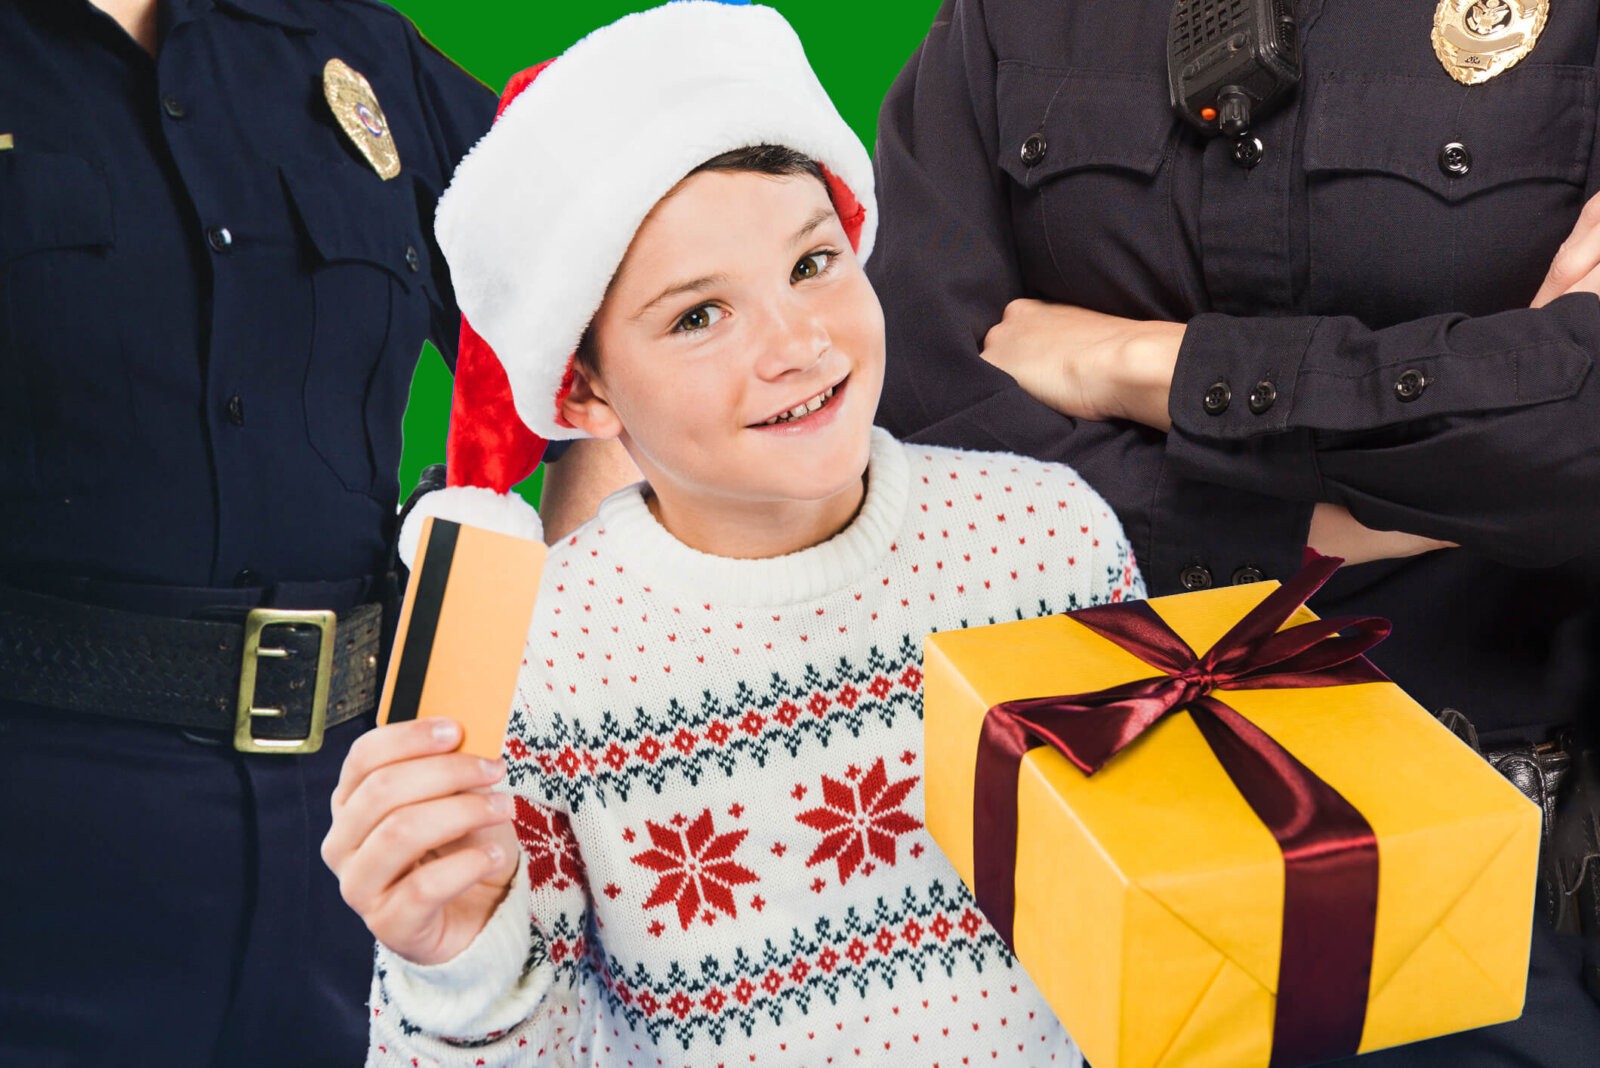 Palm Beach police are giving gifts to local kids in need